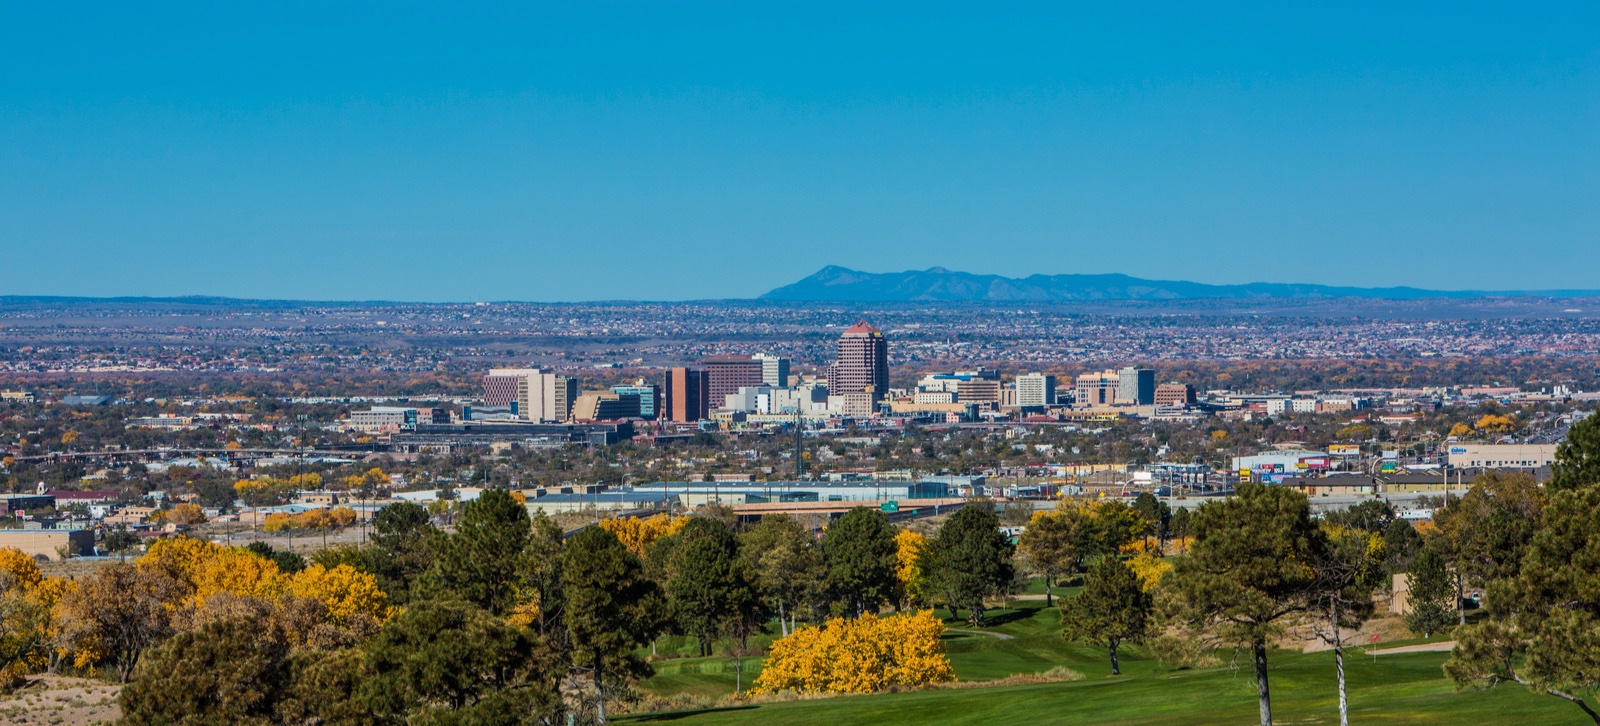 The City of Albuquerque seen from a grass field with trees changing color for the fall.